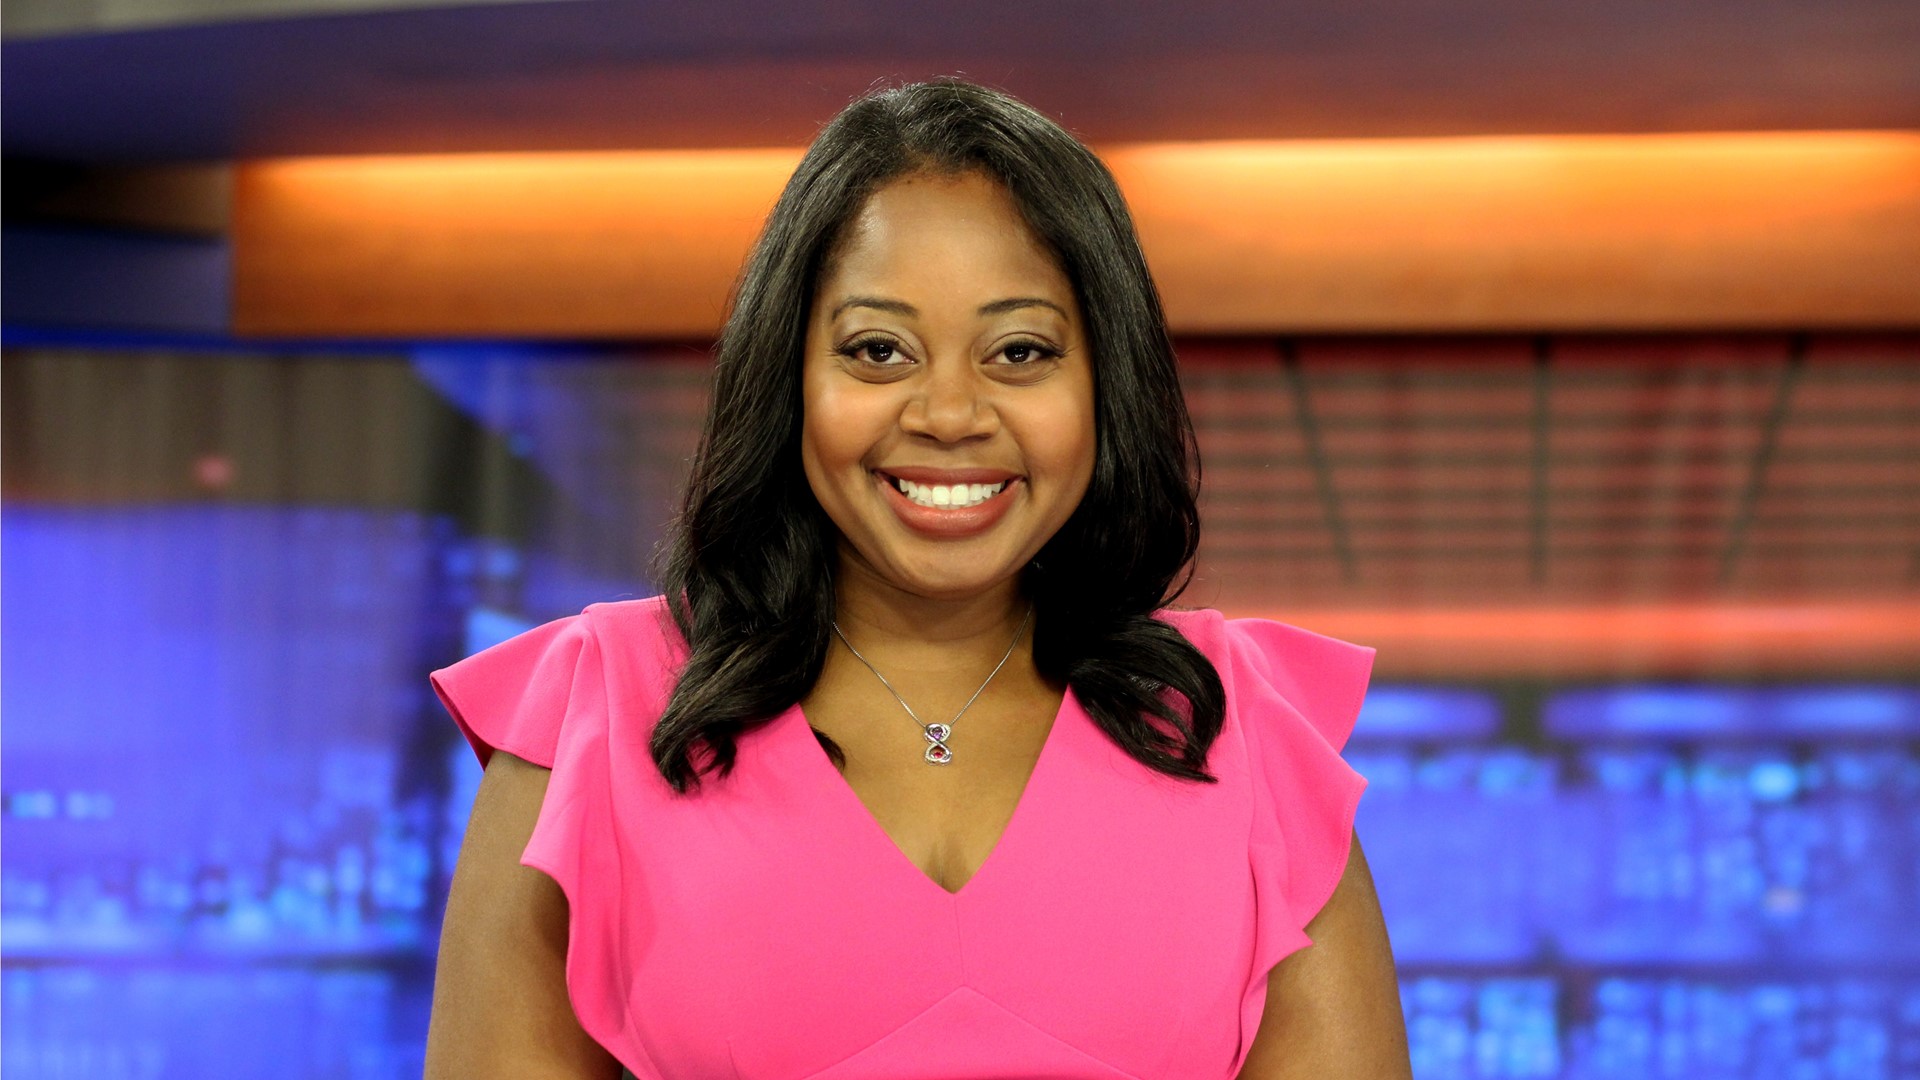 The two-time Emmy Award winner joined the 13WMAZ news team in August 2018.